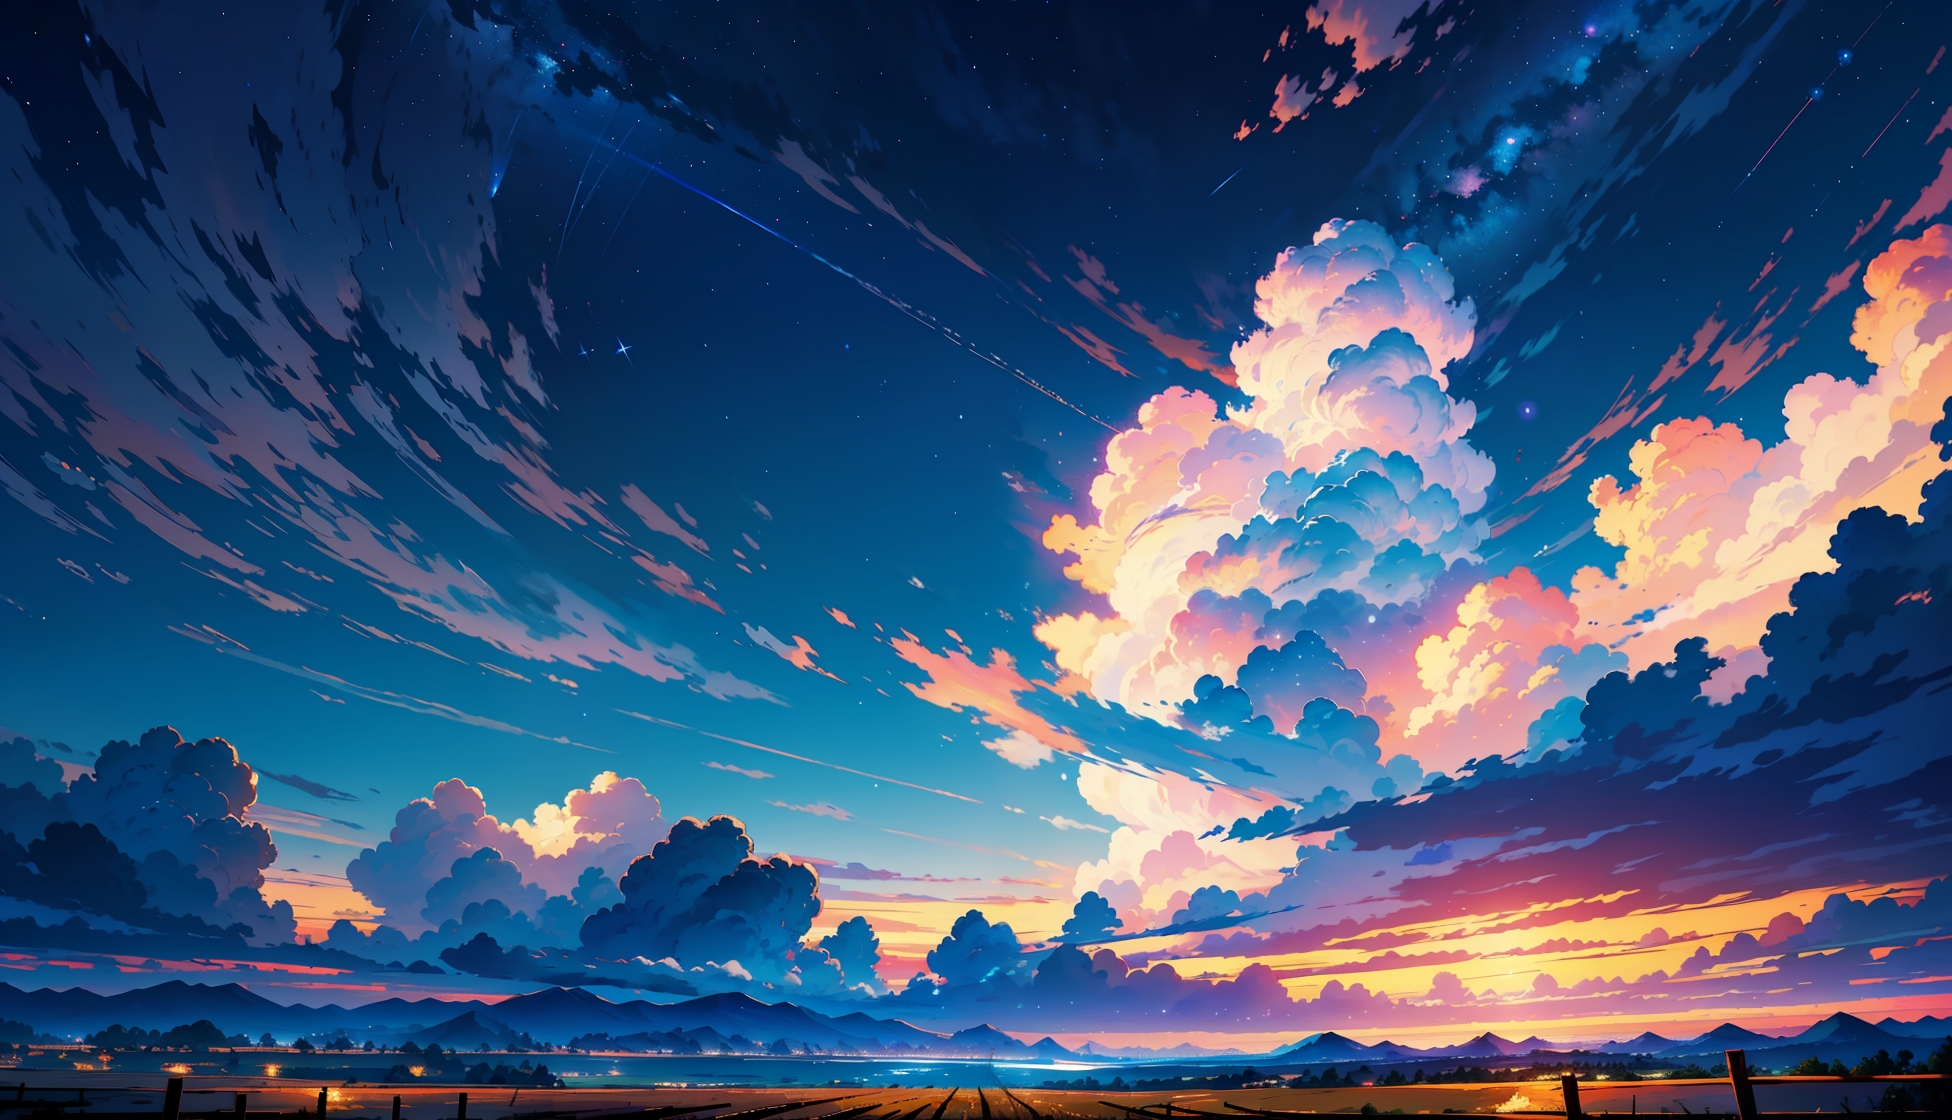 Wallpaper Scenery, Anime Landscape, Clouds, Starry Sky, Road, Grass ...